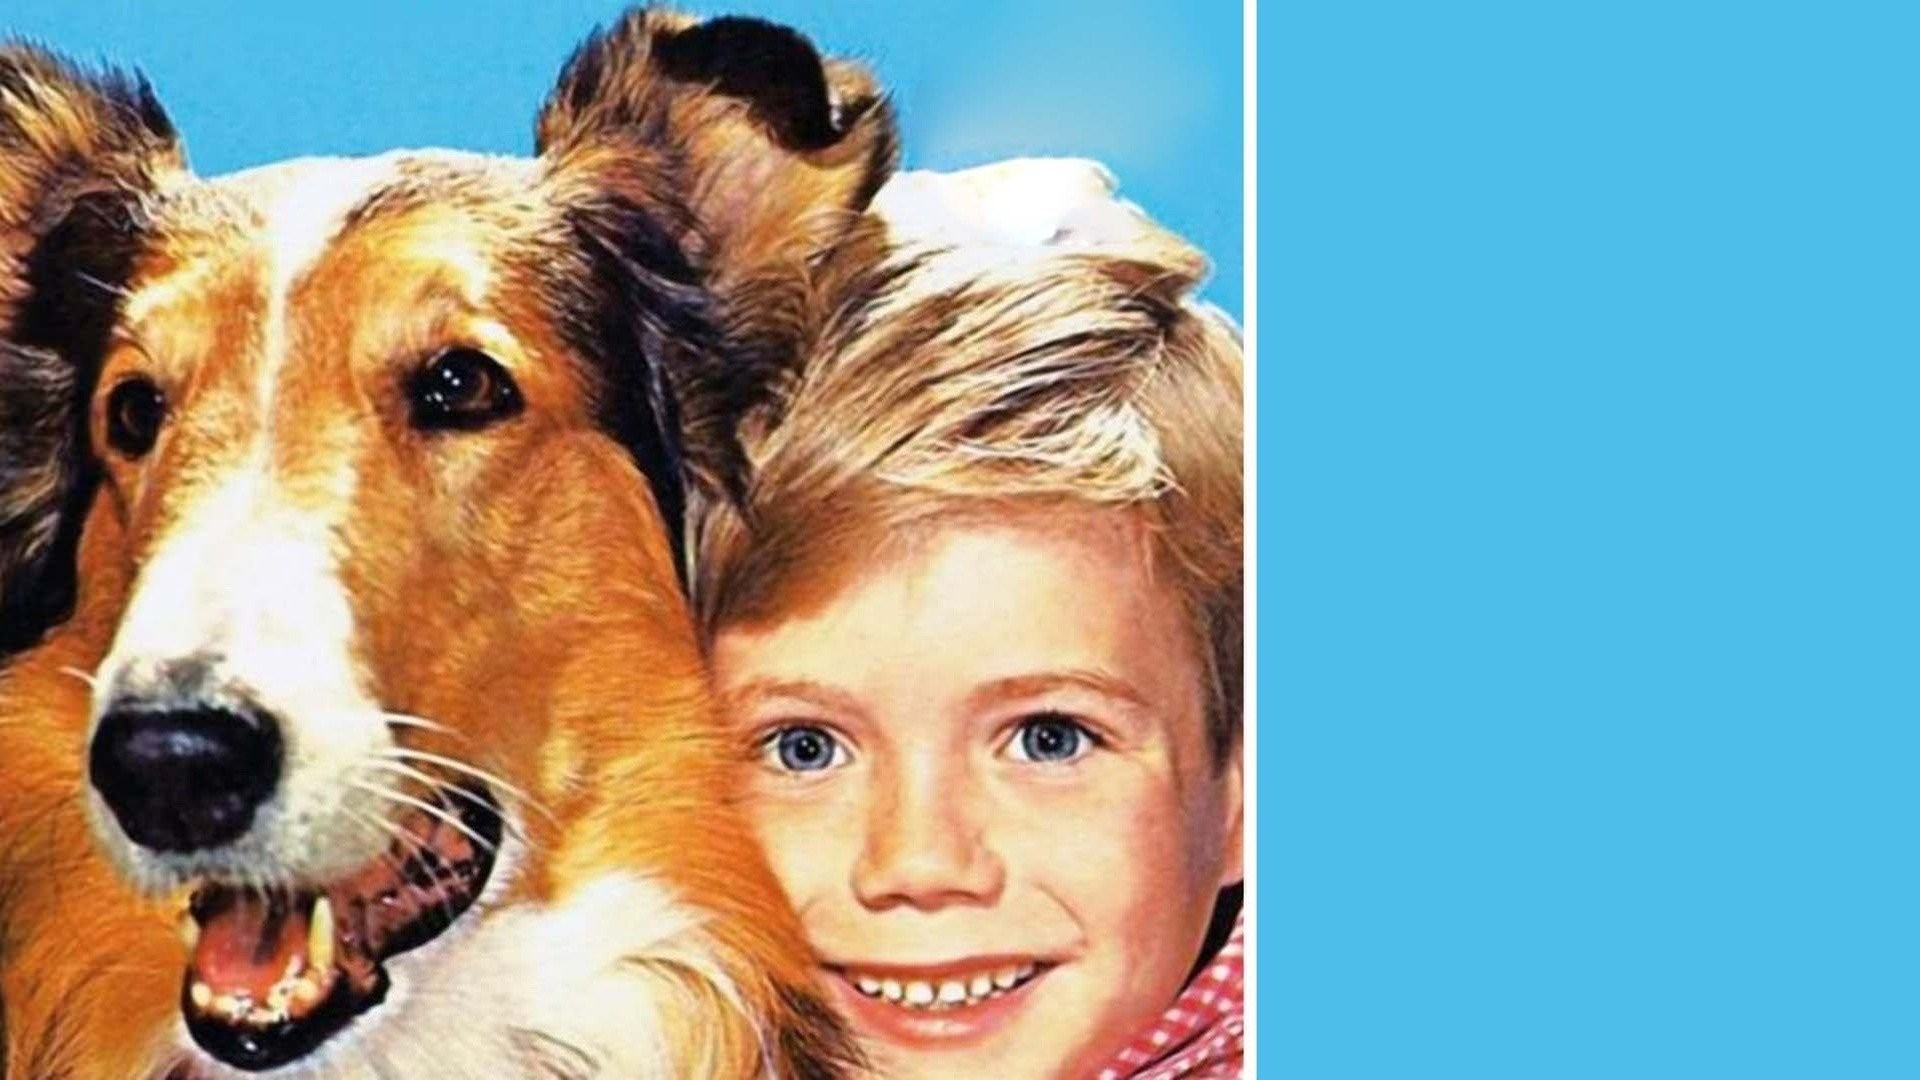 Courage of Lassie - Rotten Tomatoes